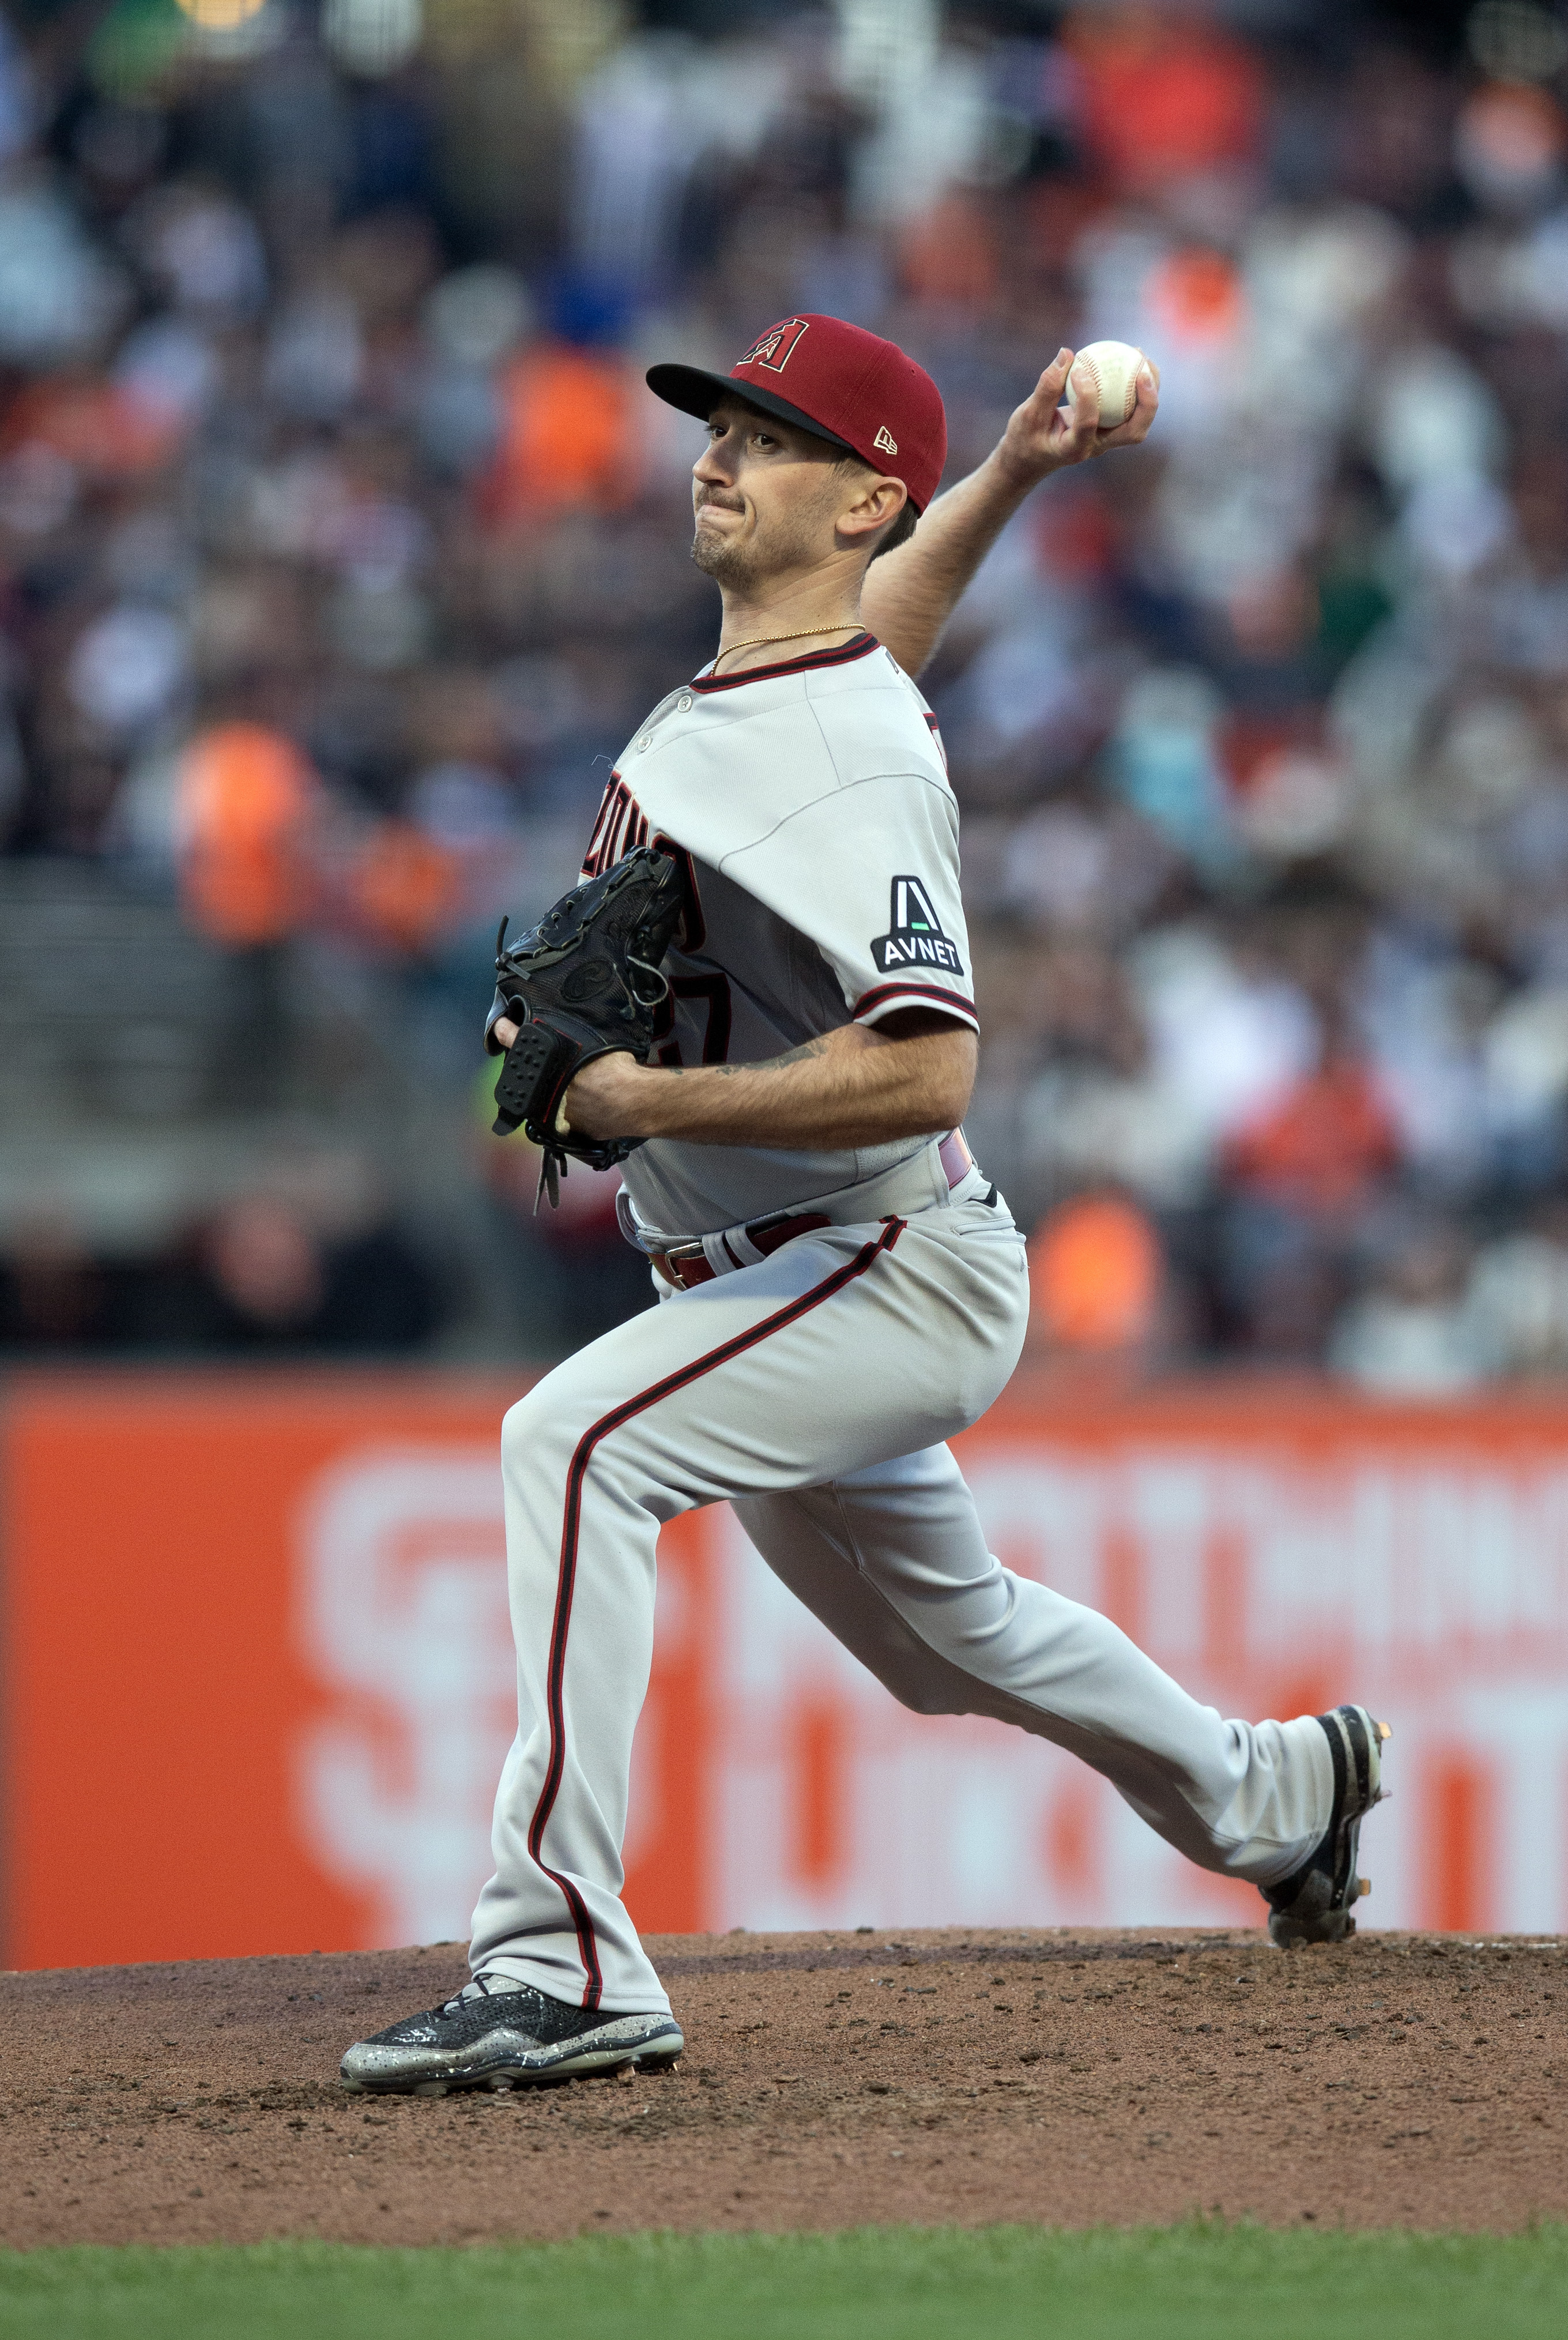 Giants begin series by knocking off West-leading D-backs